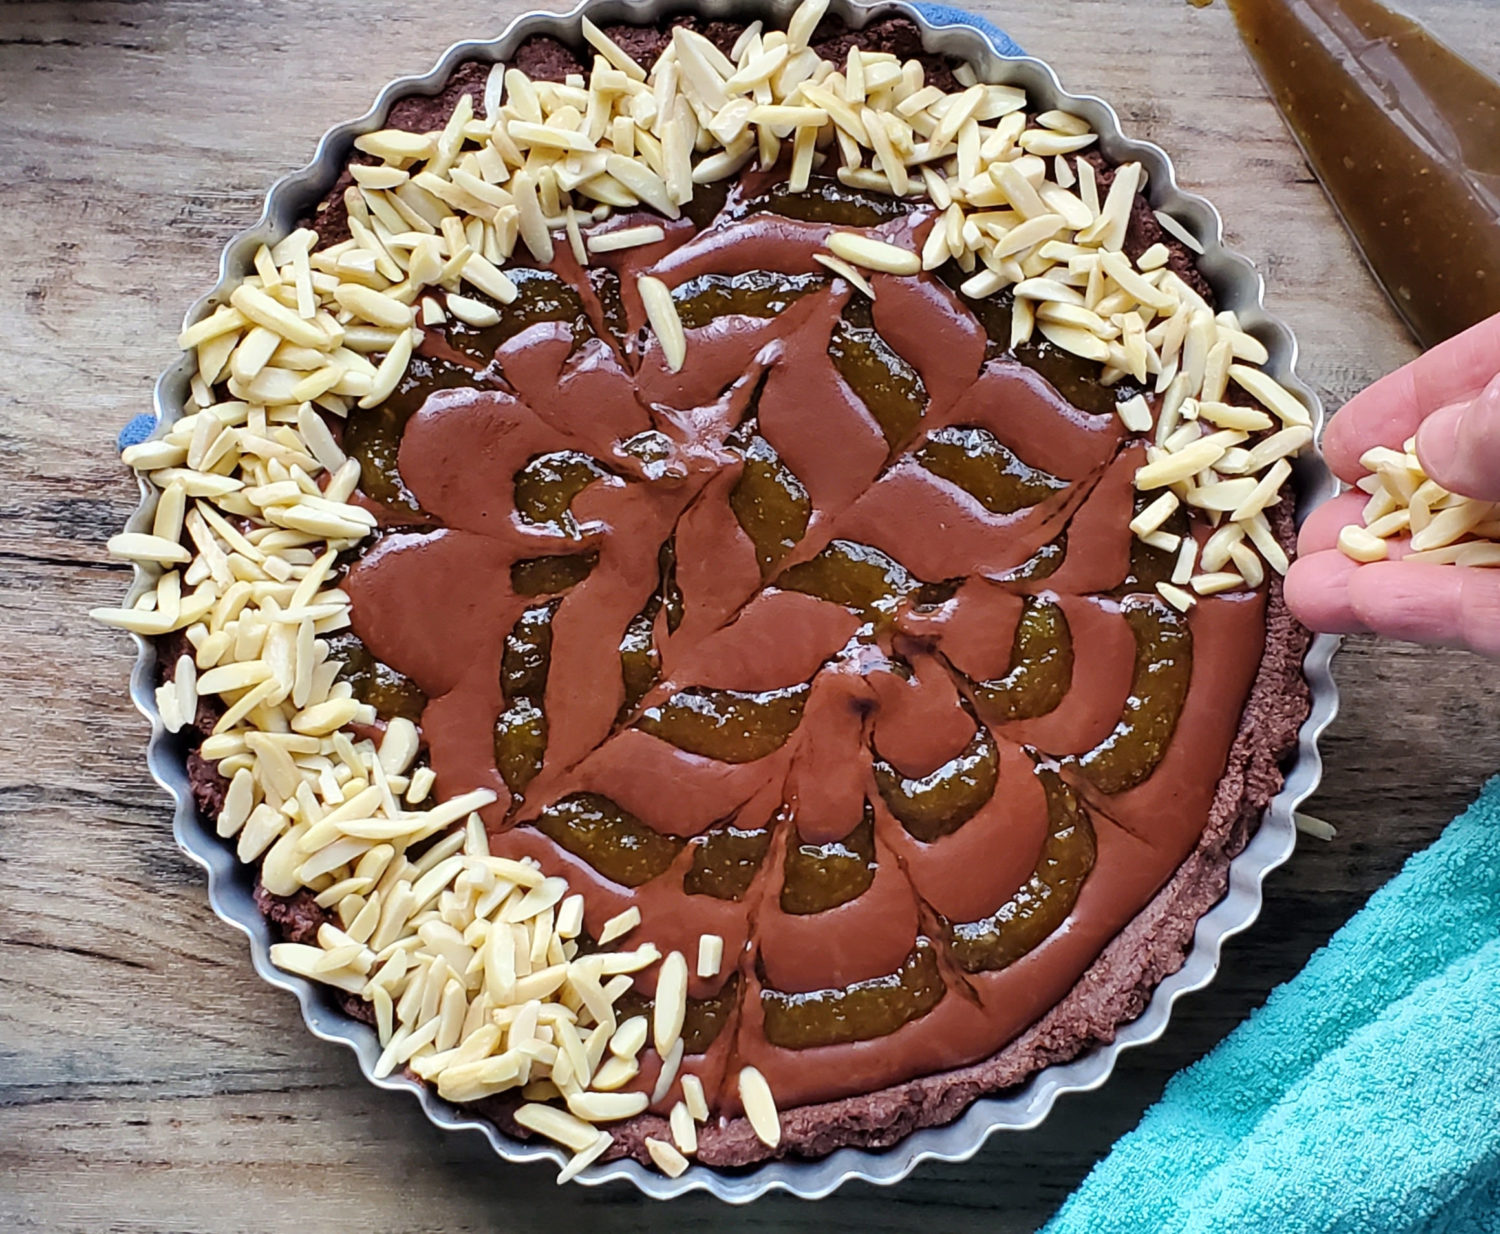 Chocolate Fig Tart: Coconut chocolate ganache & fig jam in an Almond Cocoa Crust & loads of slivered almonds. Fruity, chocolatey & nutty. Vegan never tasted so sinfully delicious!